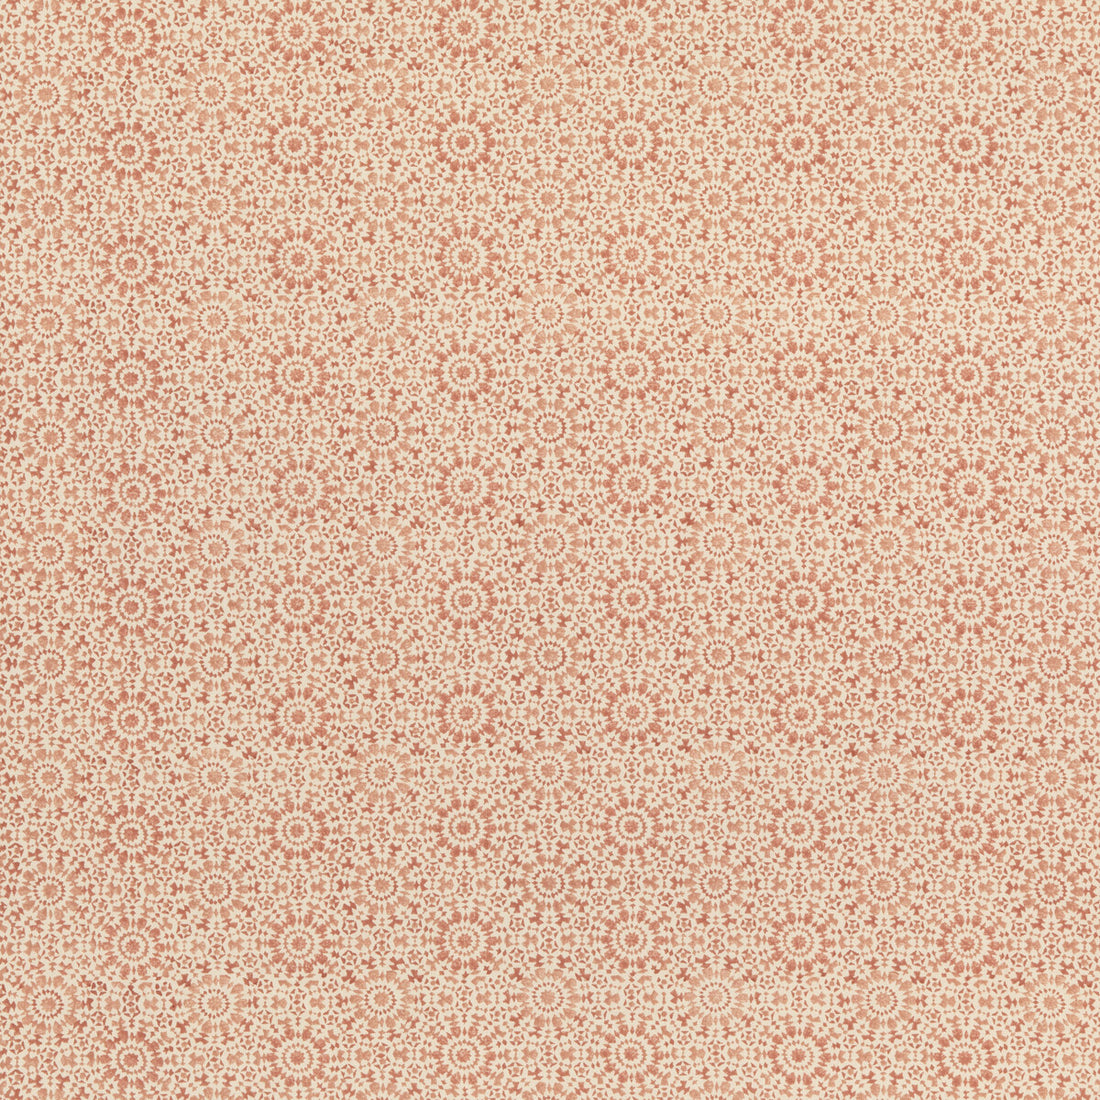 Veryan fabric in spice color - pattern BP10792.4.0 - by G P &amp; J Baker in the Artisan II collection